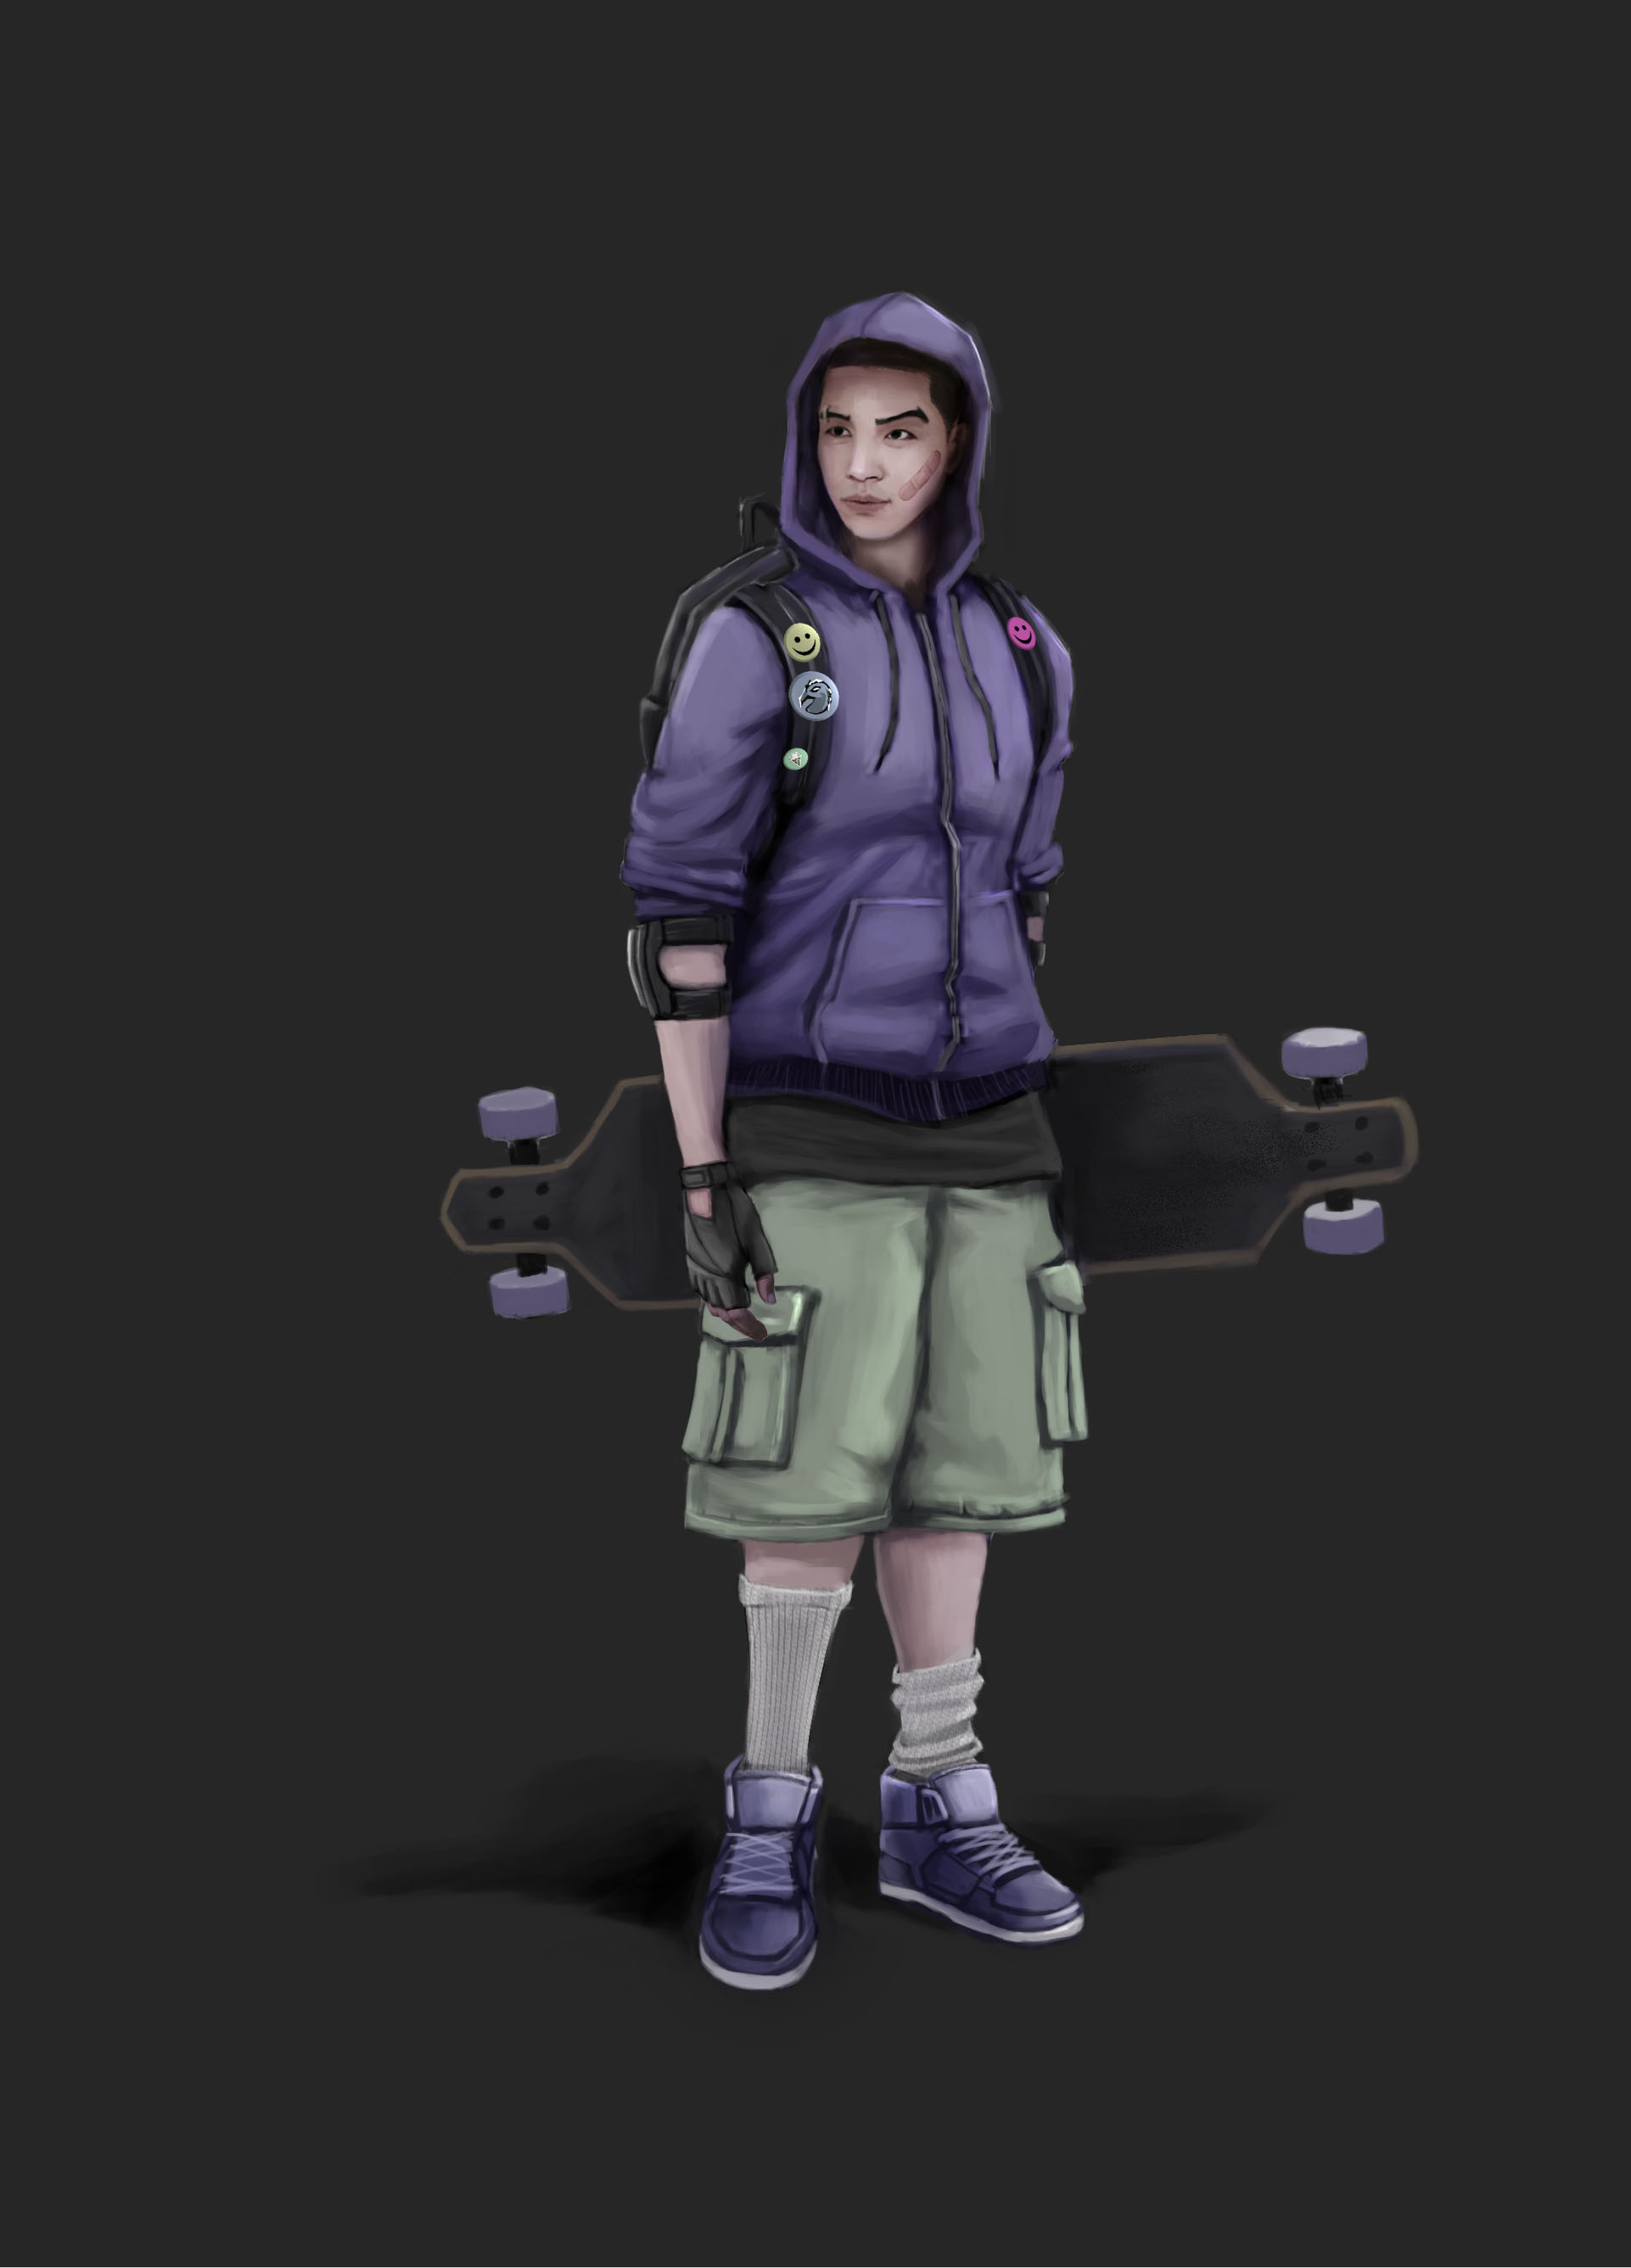 Noir Boarder Character Design
  
  <p>CONCEPT:  Design a Character for a mystery graphic novel game. Character is a classmate of one of the victims.</p>
  <p>HOW DESIGN SOLVES PROBLEMS,: I kept the character up to date with the trending fashions of today's students: long-board, comfortable clothing, event buttons attached to backpack straps. I Used the Purple as an accent color to suggest dark events that happen in the mystery story.</p>
  <p>PROCESS:  Thumbnail sketching and scanning and refining digitally.</p>
  <p>TOOLS USED: Pen/paper Photoshop</p>
  <p>CHALLENGES: Revealing the character's personality in what he wears while still being able to fit in a mystery genre novel.</p>
  